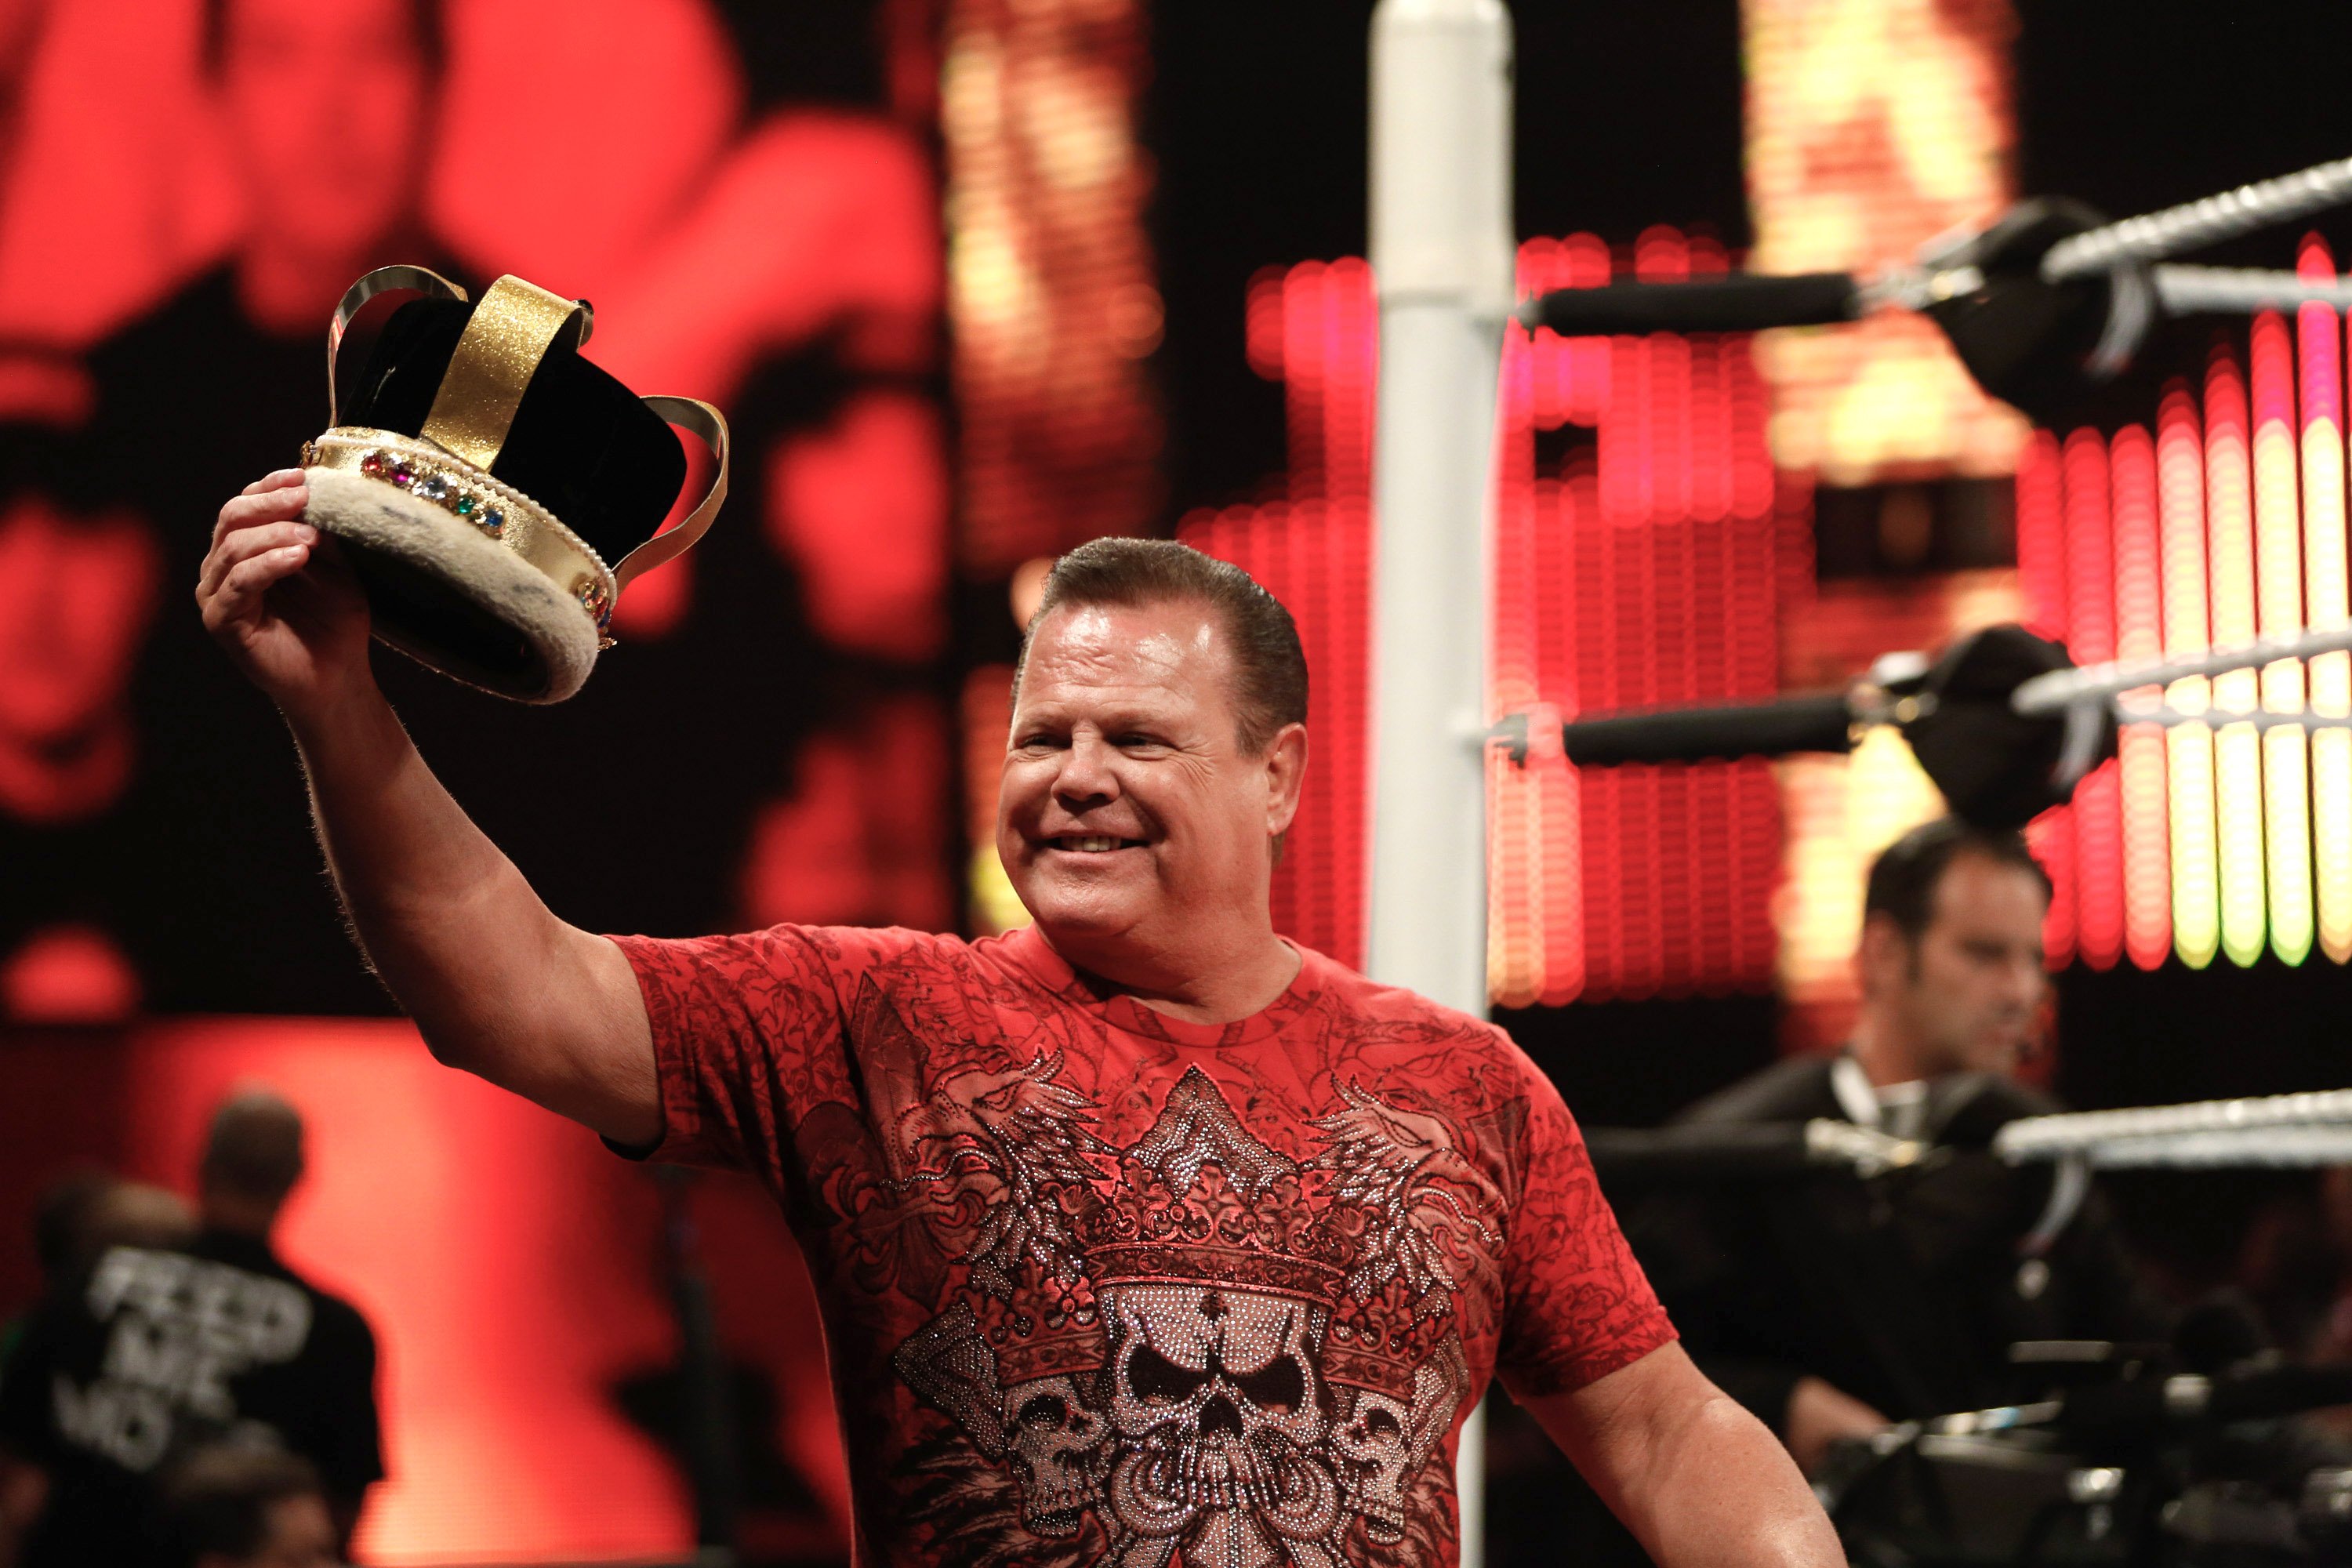 Jerry "The King" Lawler at Barclays Center of Brooklyn on August 23, 2015, in New York City. | Source: Getty Images